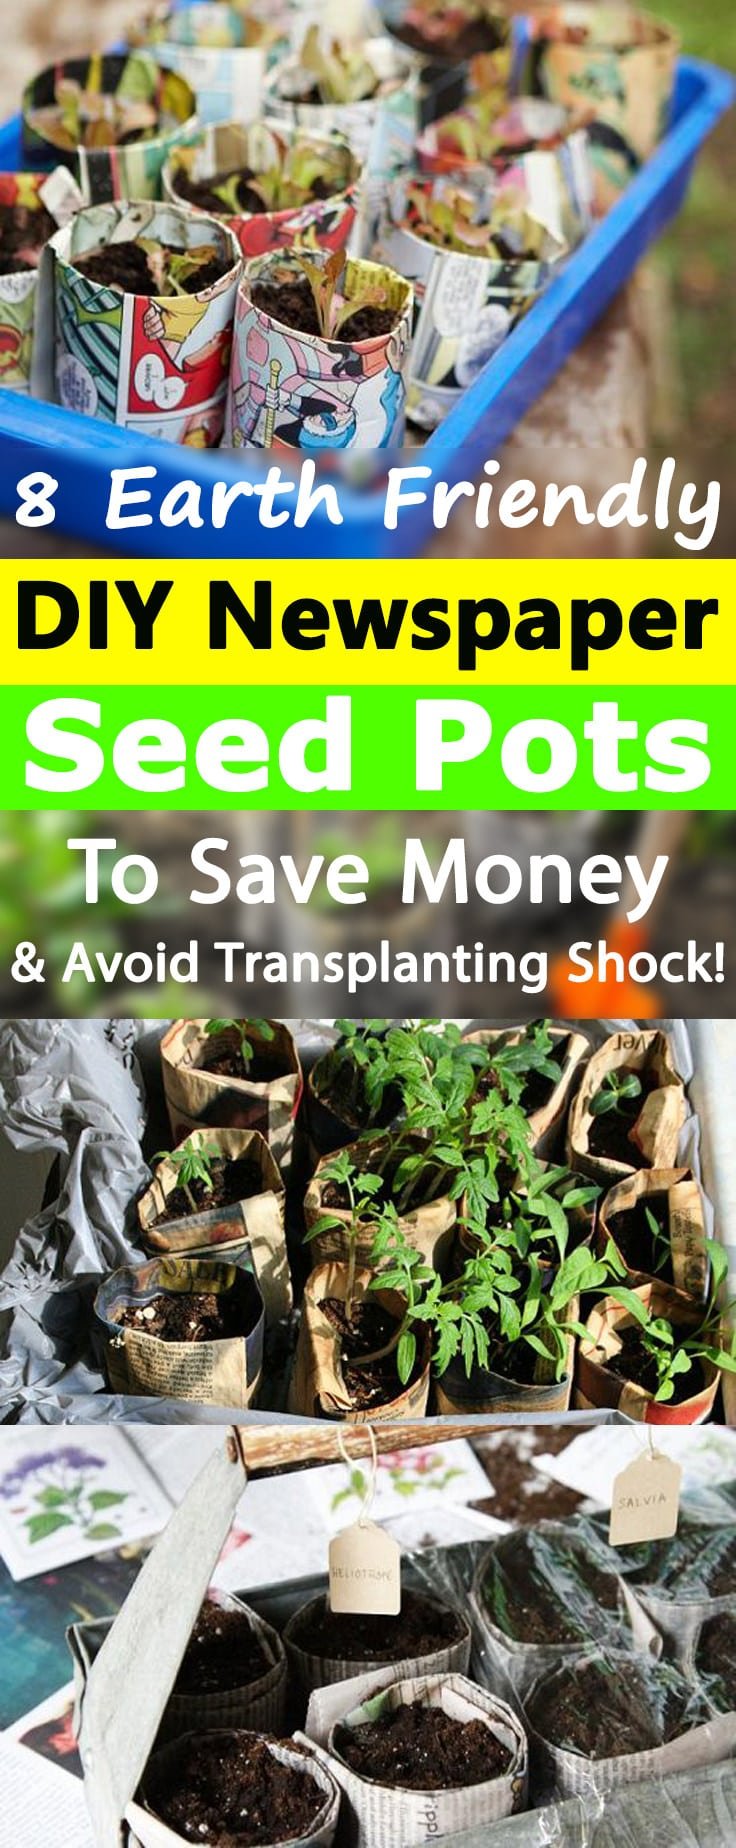 Save money, stop transplanting shock, and go earth-friendly way by creating these free, biodegradable, soil-friendly DIY Newspaper Pots!